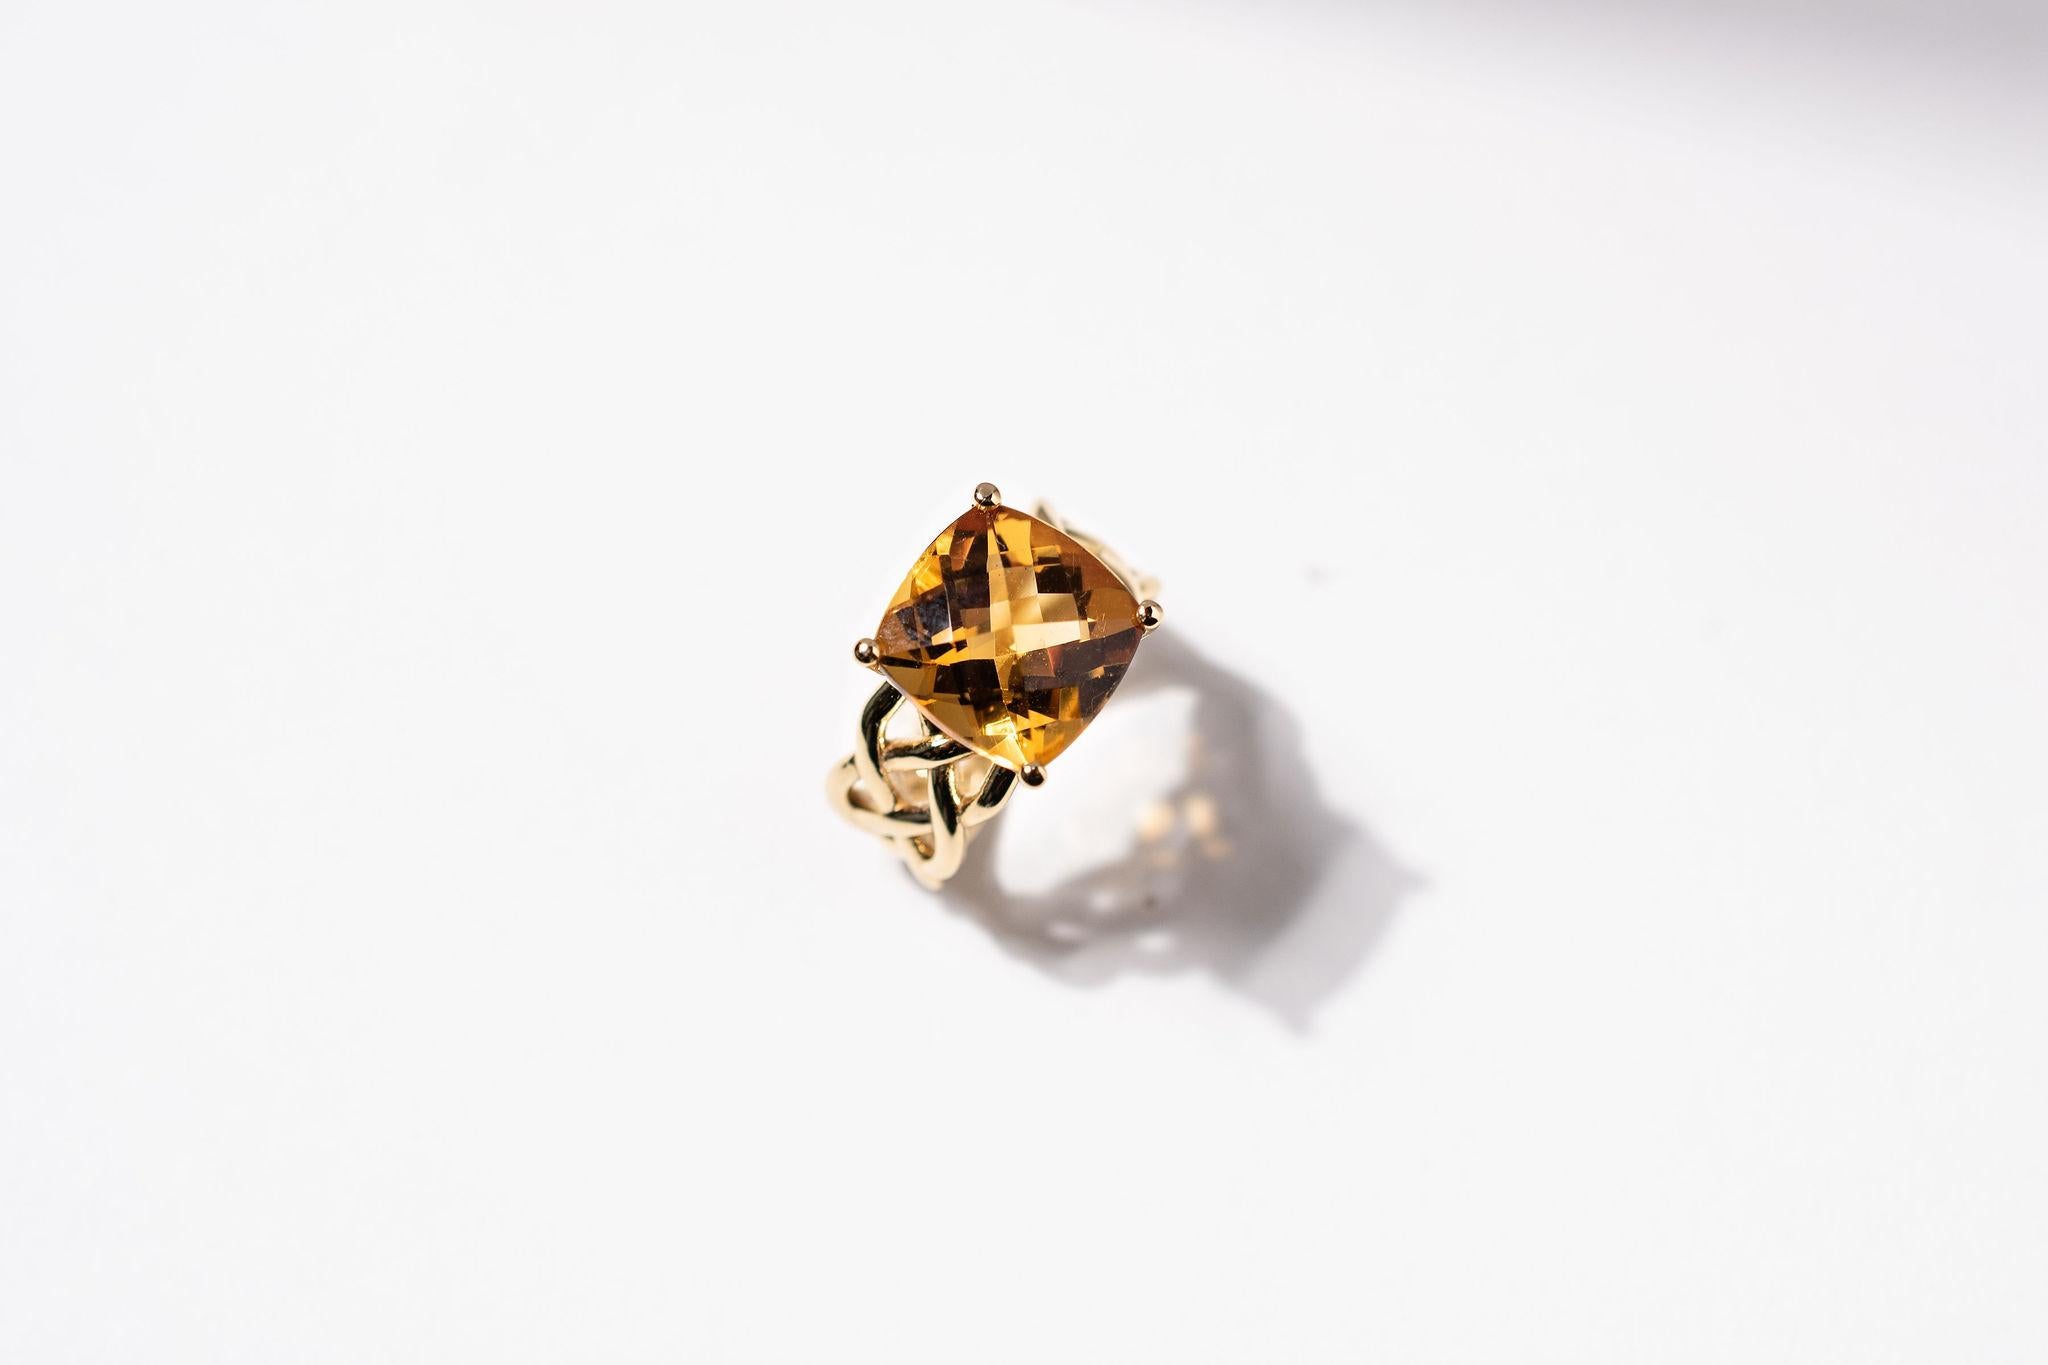 Vibrant Yellow this 8ct AAA 10-carat statement ring was made from recycled 14k yellow gold. Handmade in Toronto. The Citrine radiates warmth especially when the sun hits the surface of the stone. It is a brightly coloured stone and it really is very